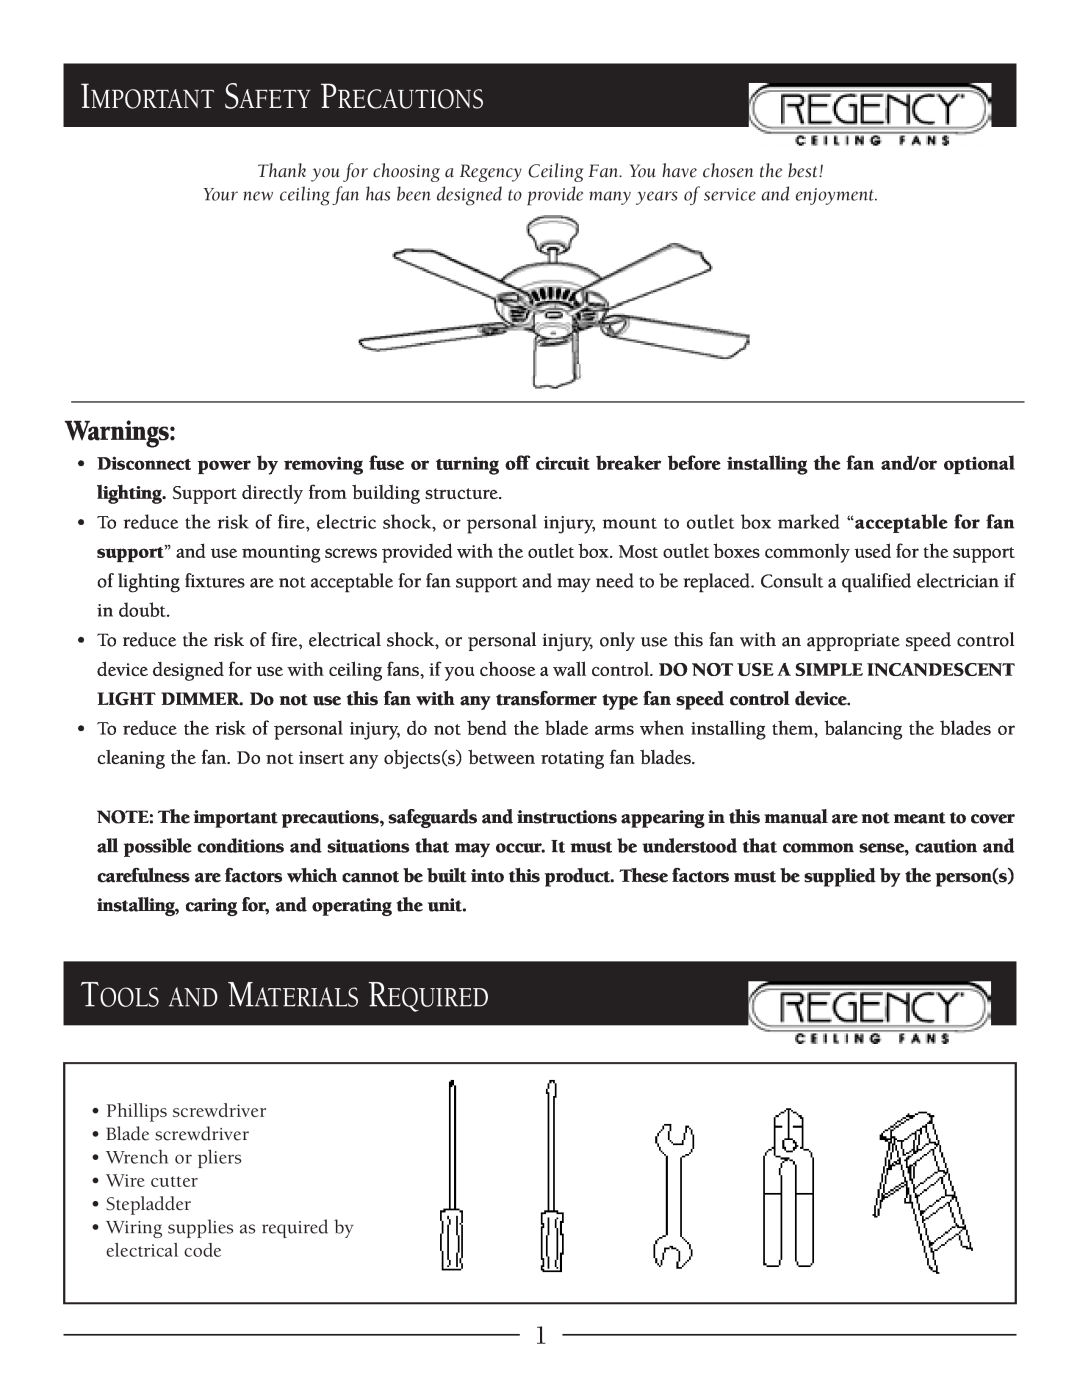 Regency MX Excel owner manual Important Safety Precautions, Tools And Materials Required, Warnings 